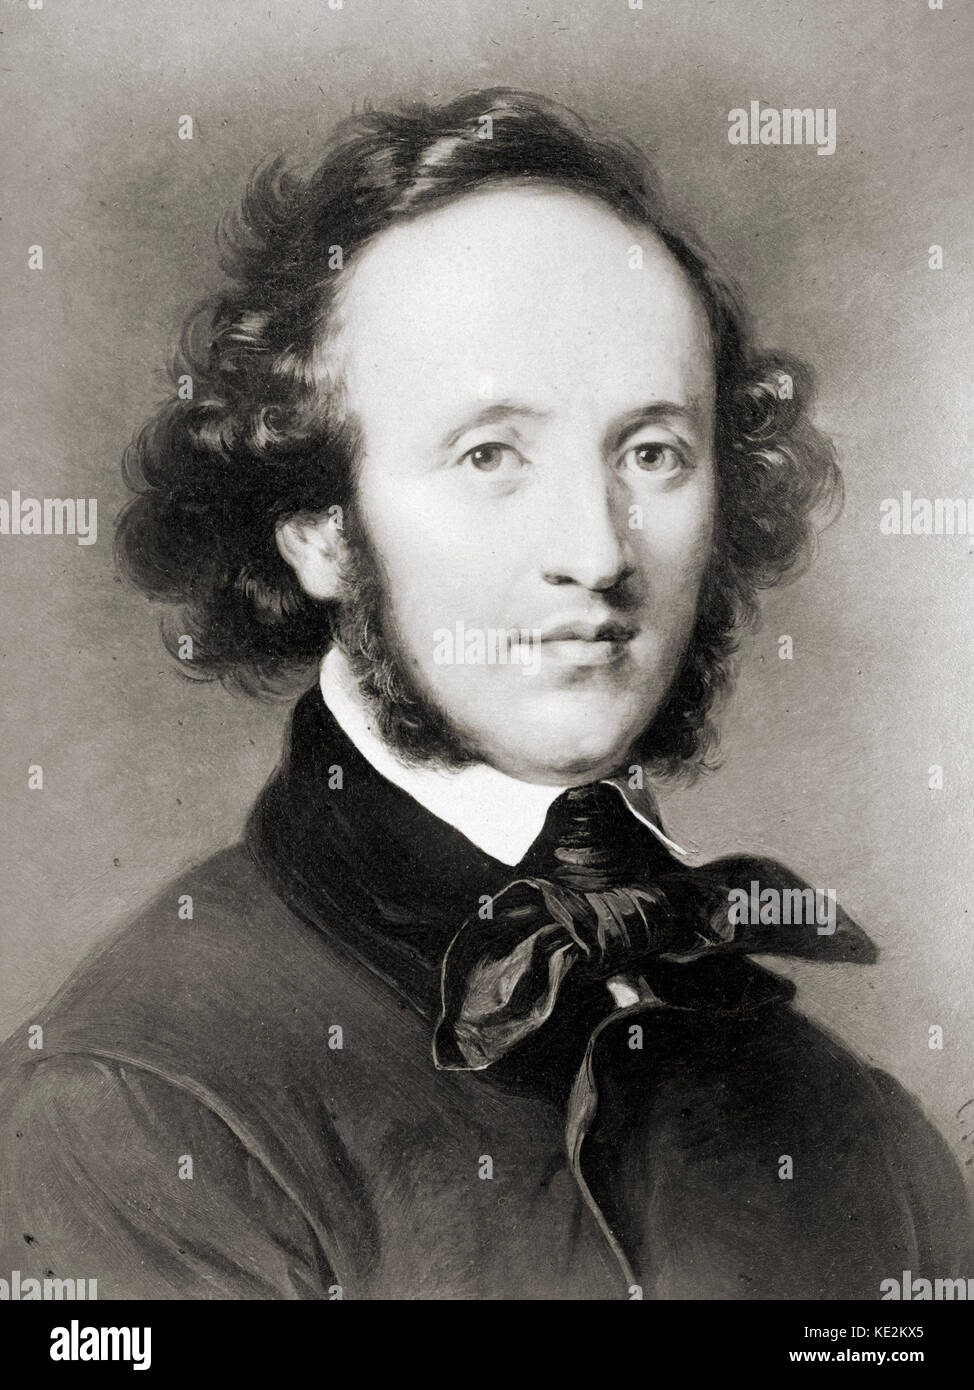 Felix Mendelssohn portrait by G. Jager. German composer and conductor 3 February 1809 – 4 November 1847 Stock Photo